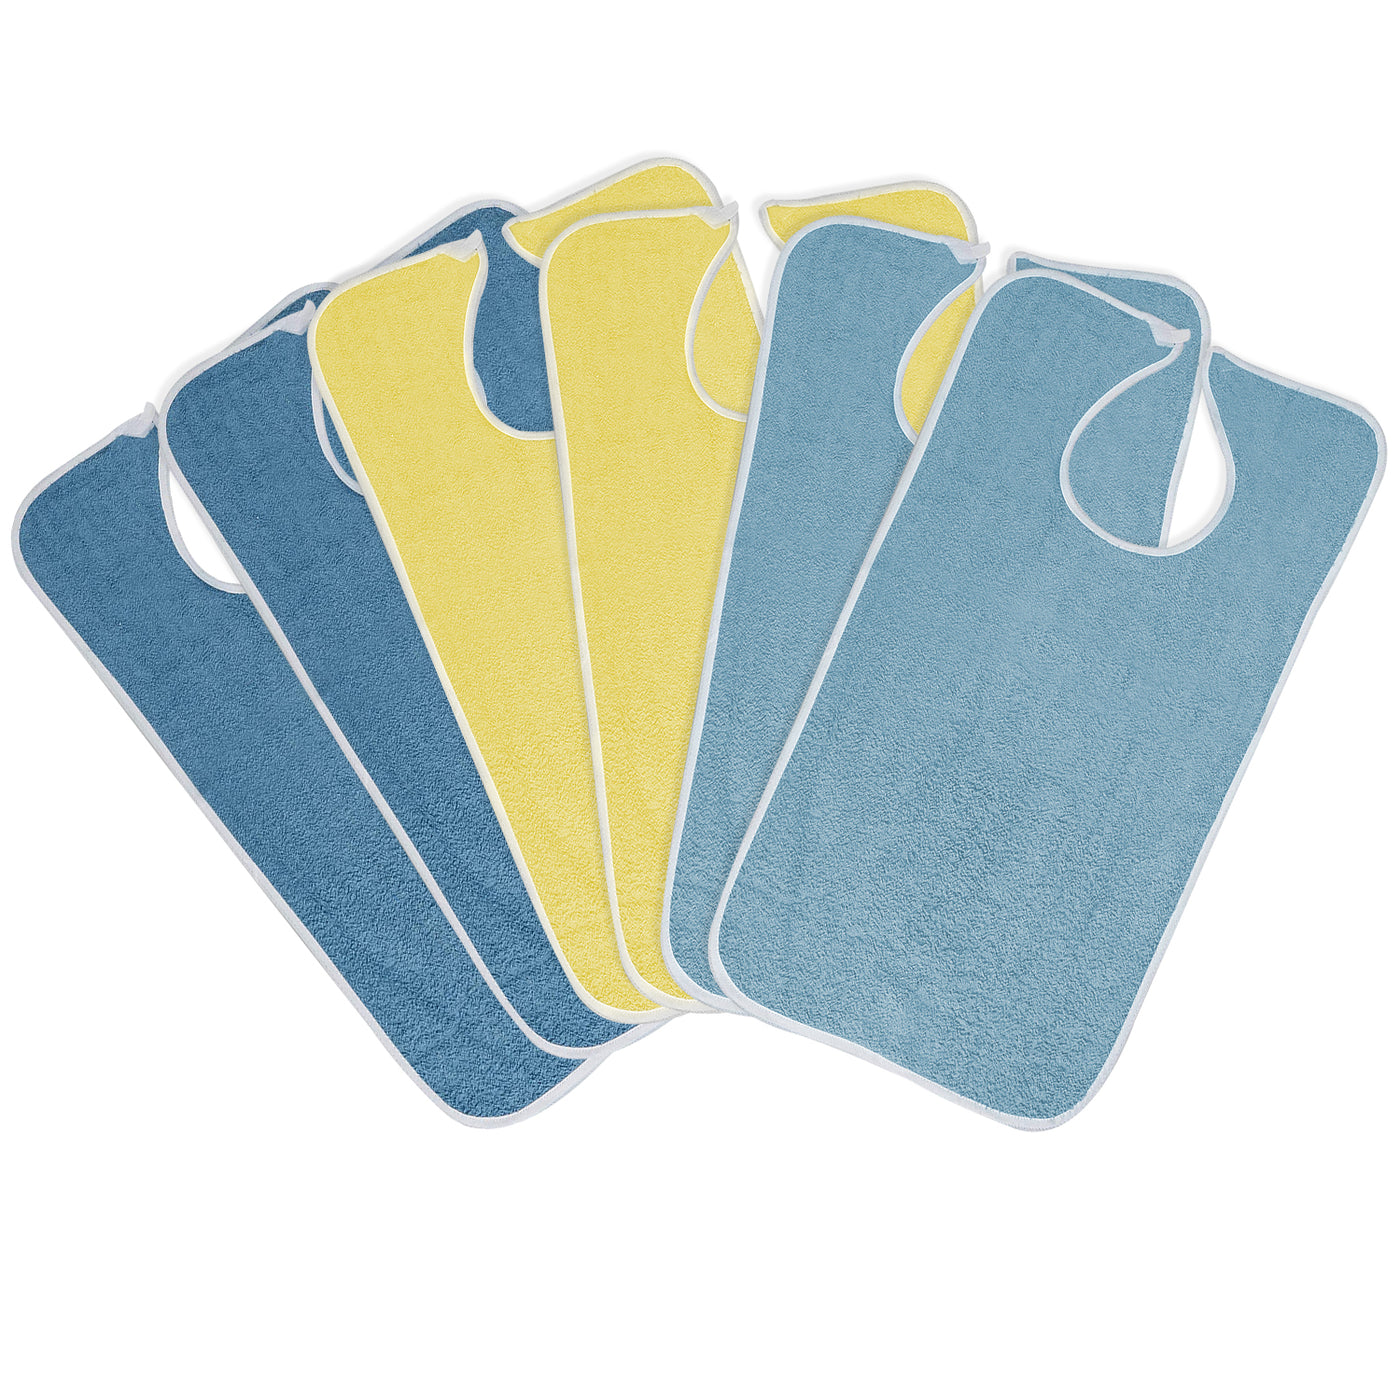 Terry Adult Bib with Velcro Closure (Assorted Color Combinations) - Noble's Health Care Products Solutions